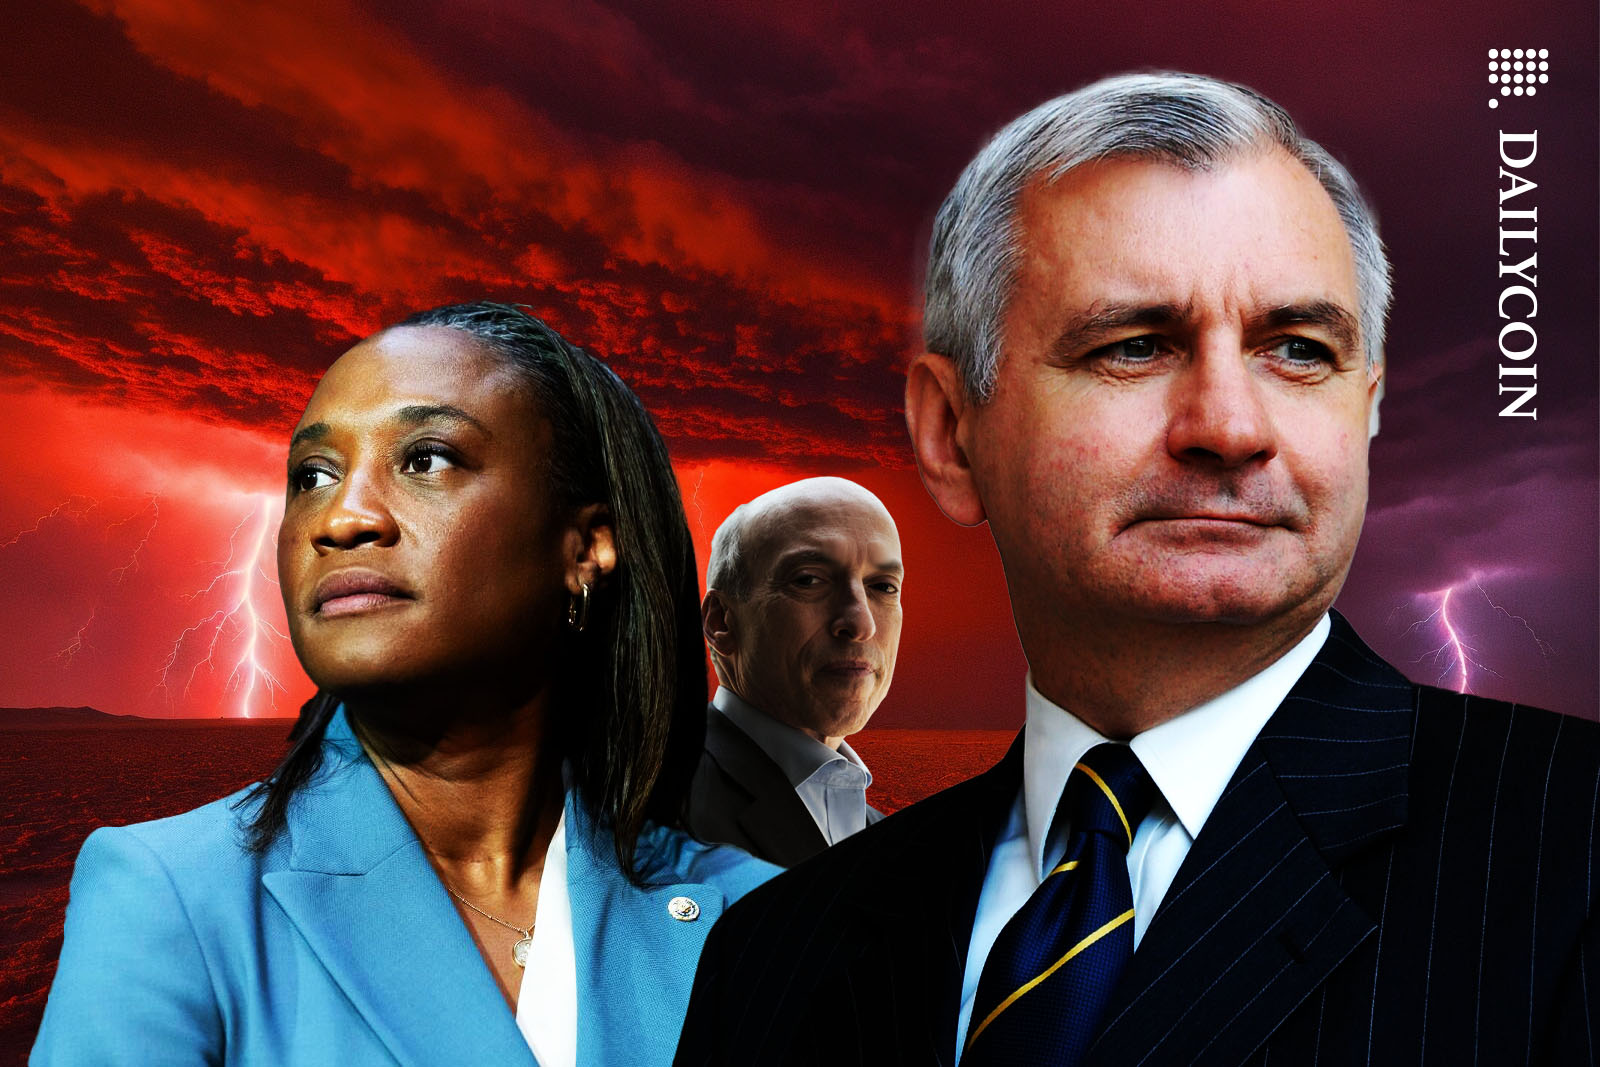 Dramatic juxtaposition of Jack Reed, Laphonza Butler and Gary Gensler infront of a red stormy background.